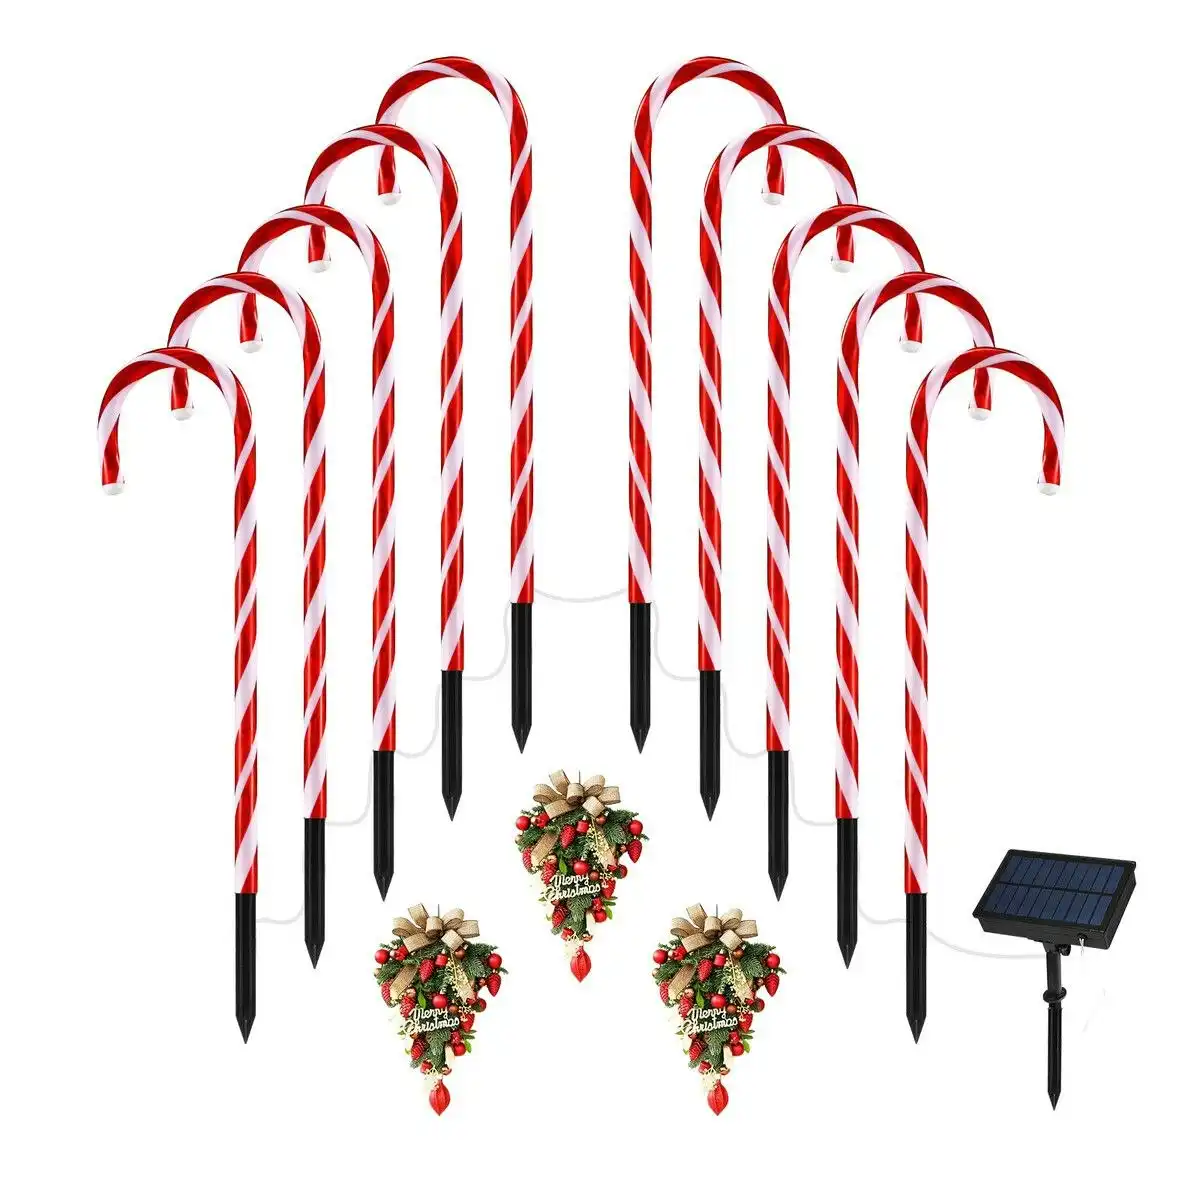 Ausway Christmas Solar Light LED Candy Cane Outdoor Garden Decoration Pathway Holiday Ornament 10Pcs